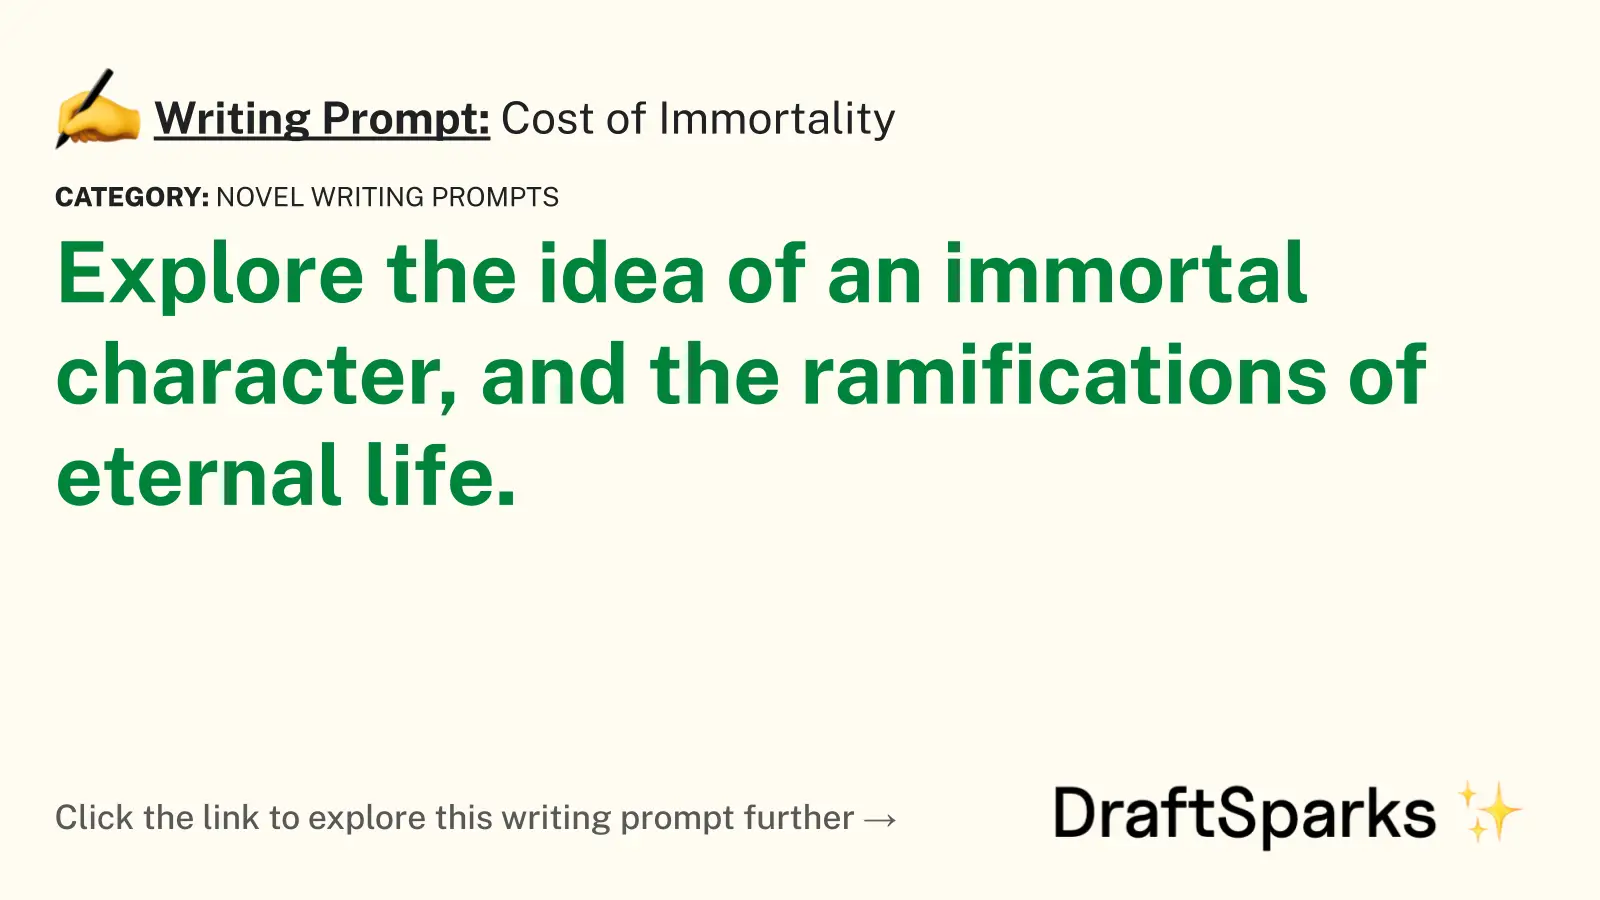 Cost of Immortality